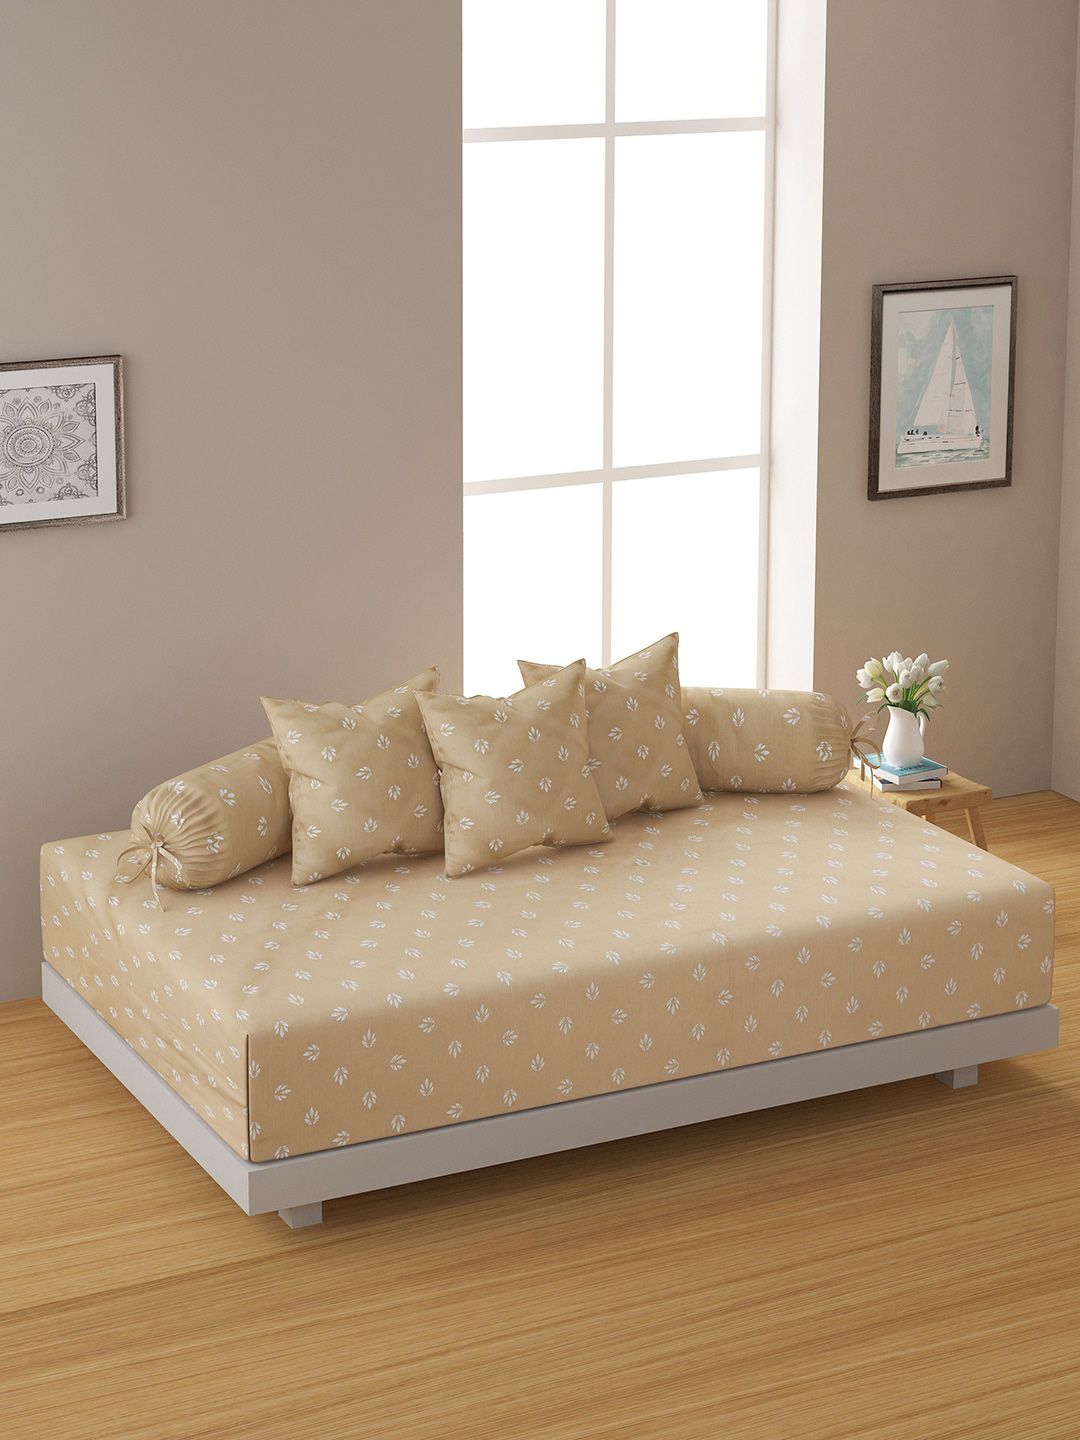 SWAYAM Set Of 6 Beige & White Printed Bedsheet With Bolster & Cushion Covers Price in India